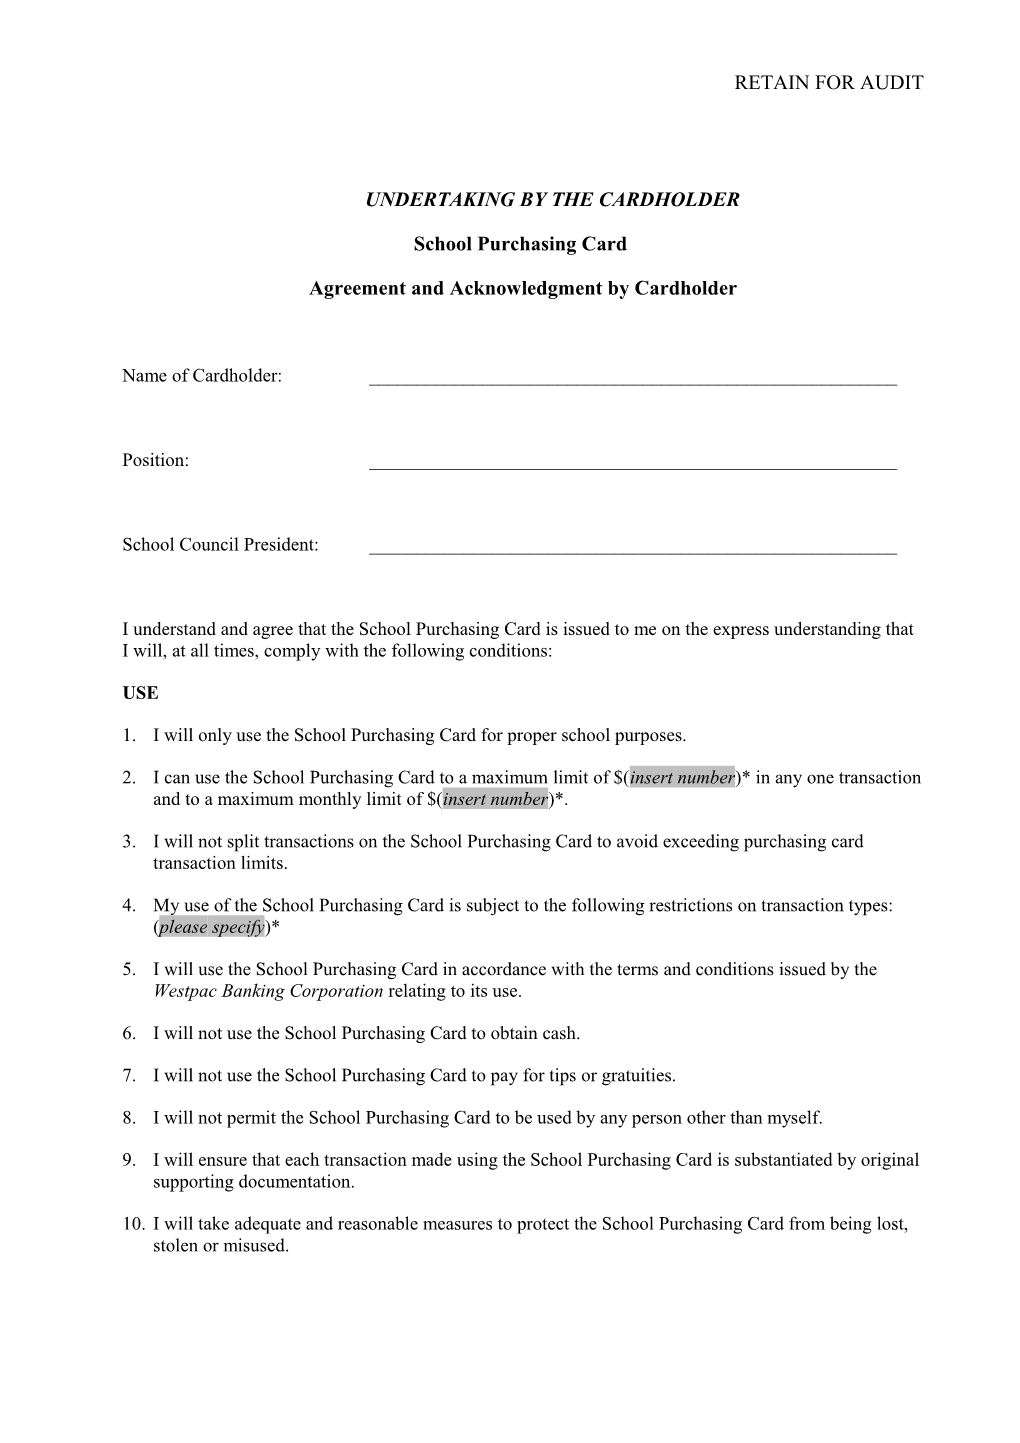 Undertaking by the Cardholder: School Purchasing Card Agreement and Acknowledgement By